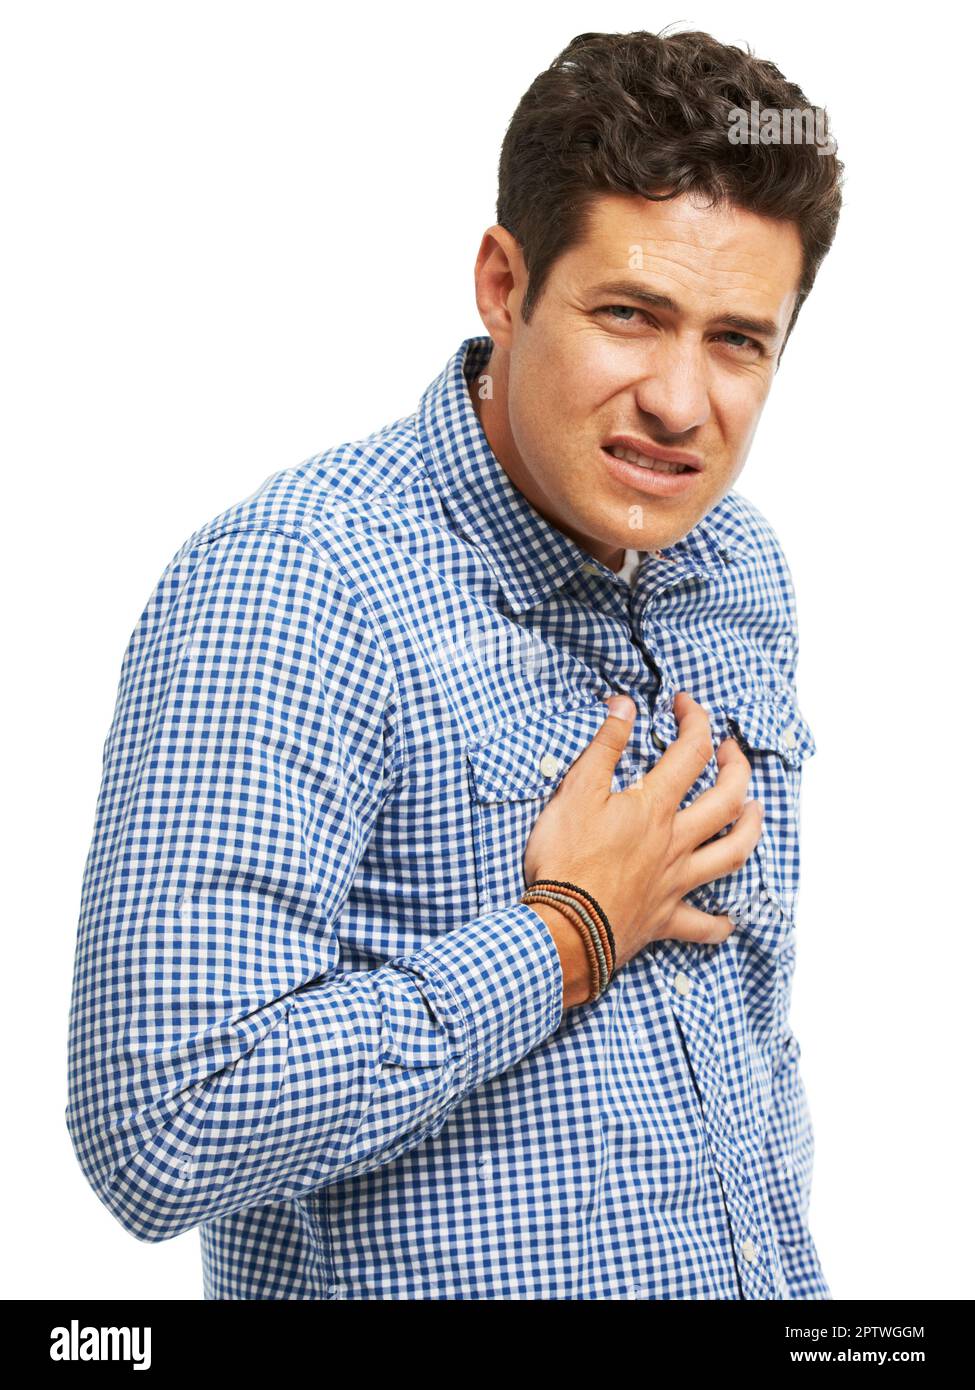 The nagging feeling of heartburn...Young man clutching his chest in ...